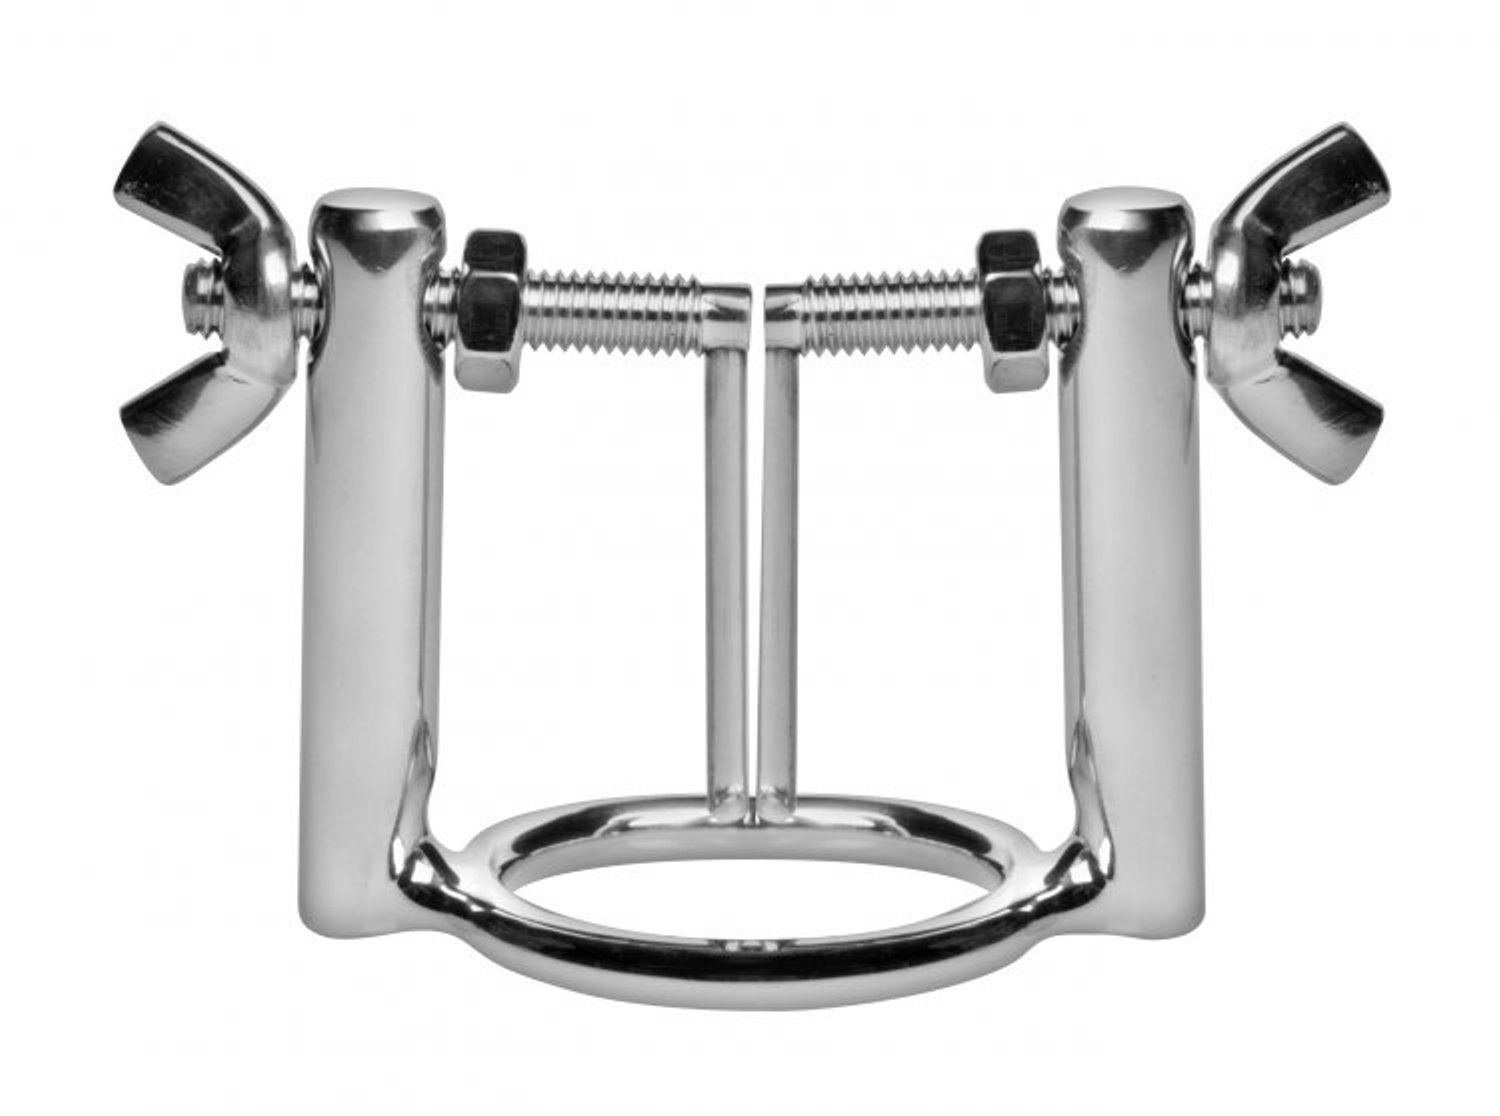 STAINLESS STEEL URETHRAL STRETCHER CHASTITY DEVICE